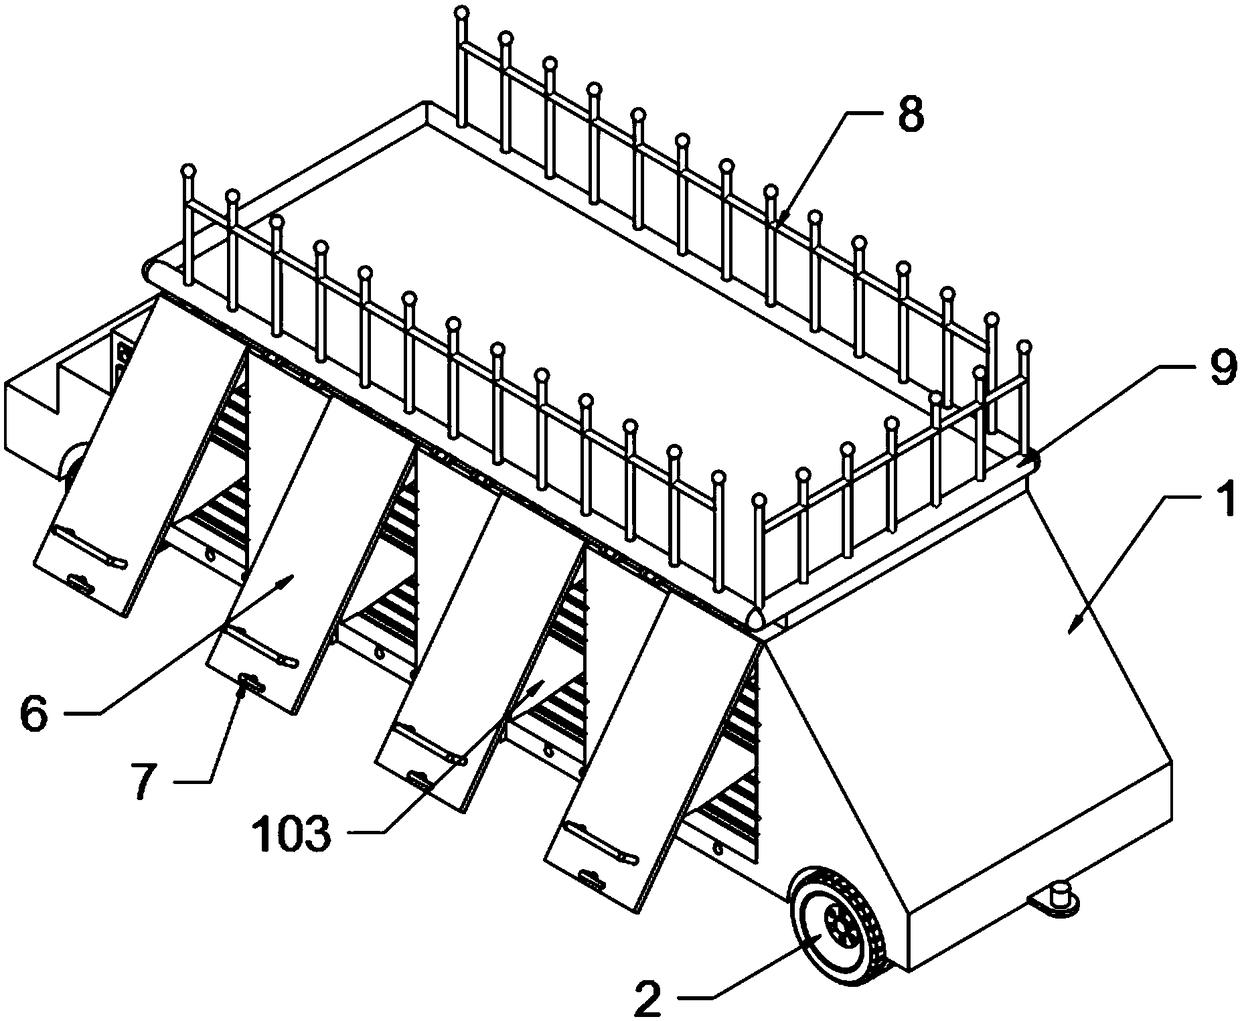 Mobile luggage carrying device for air transportation